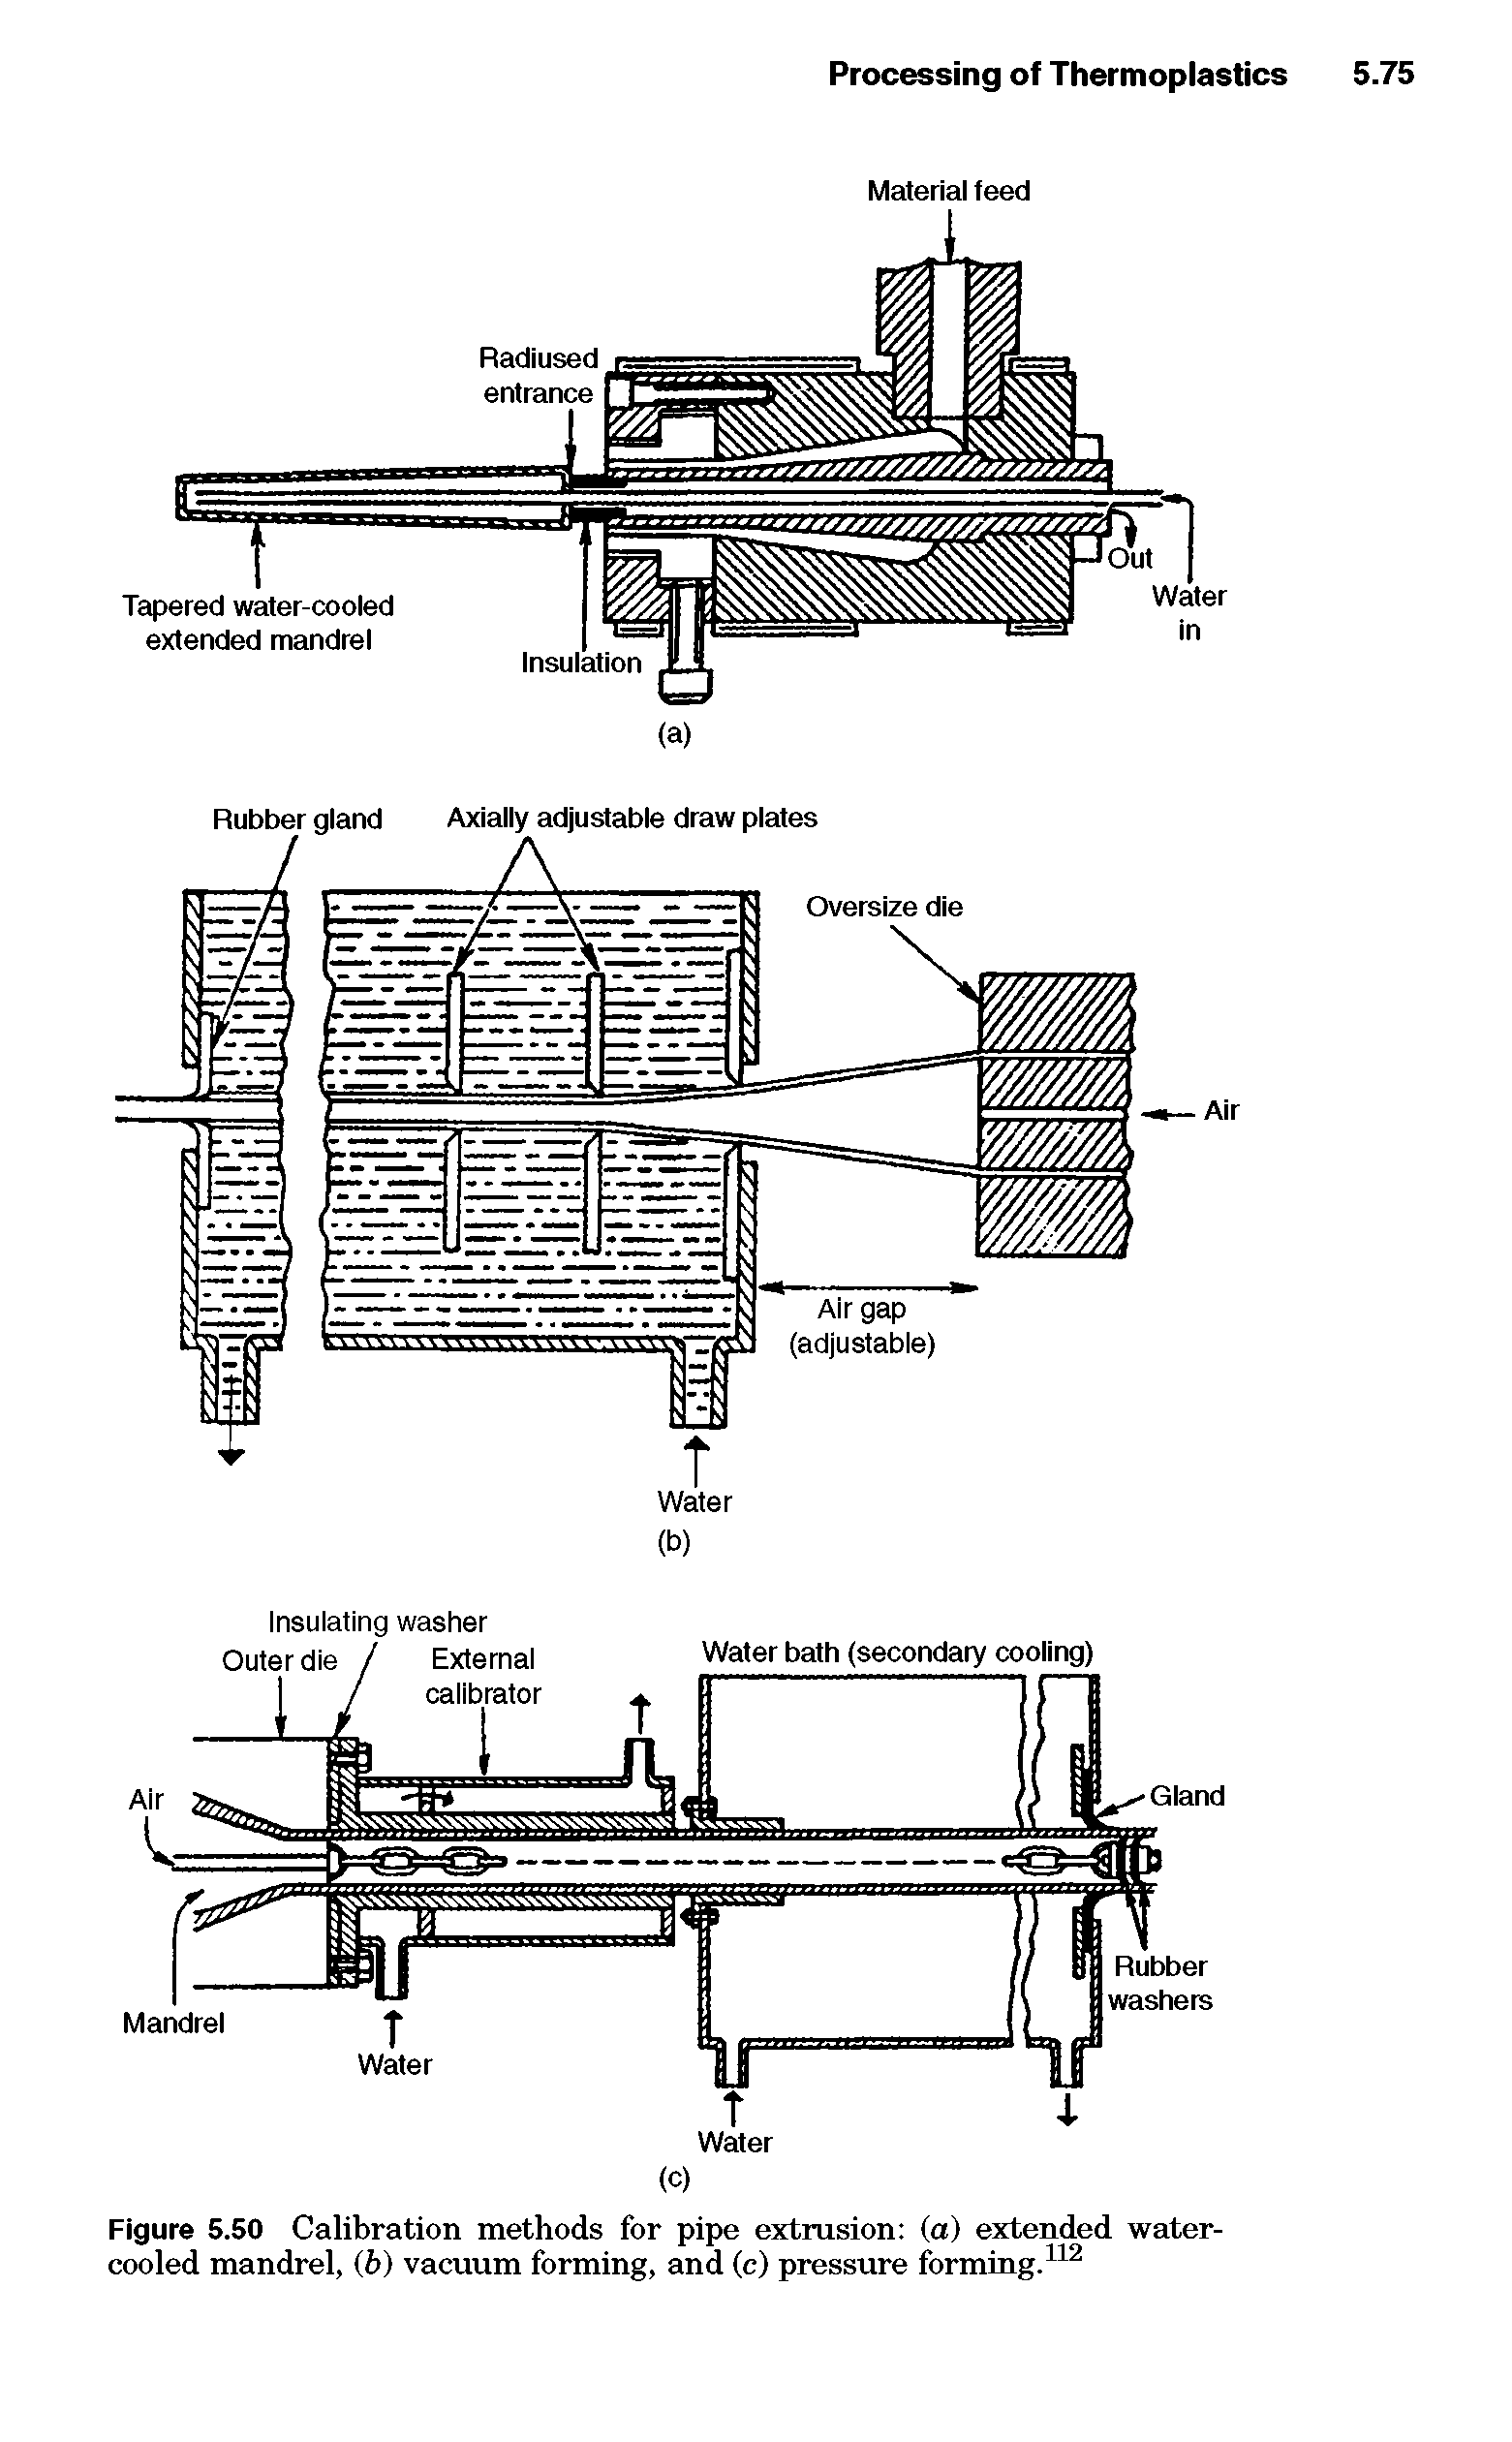 Figure 5.50 Calibration methods for pipe extrusion (a) extended water-cooled mandrel, (b) vacuum forming, and (c) pressure forming.